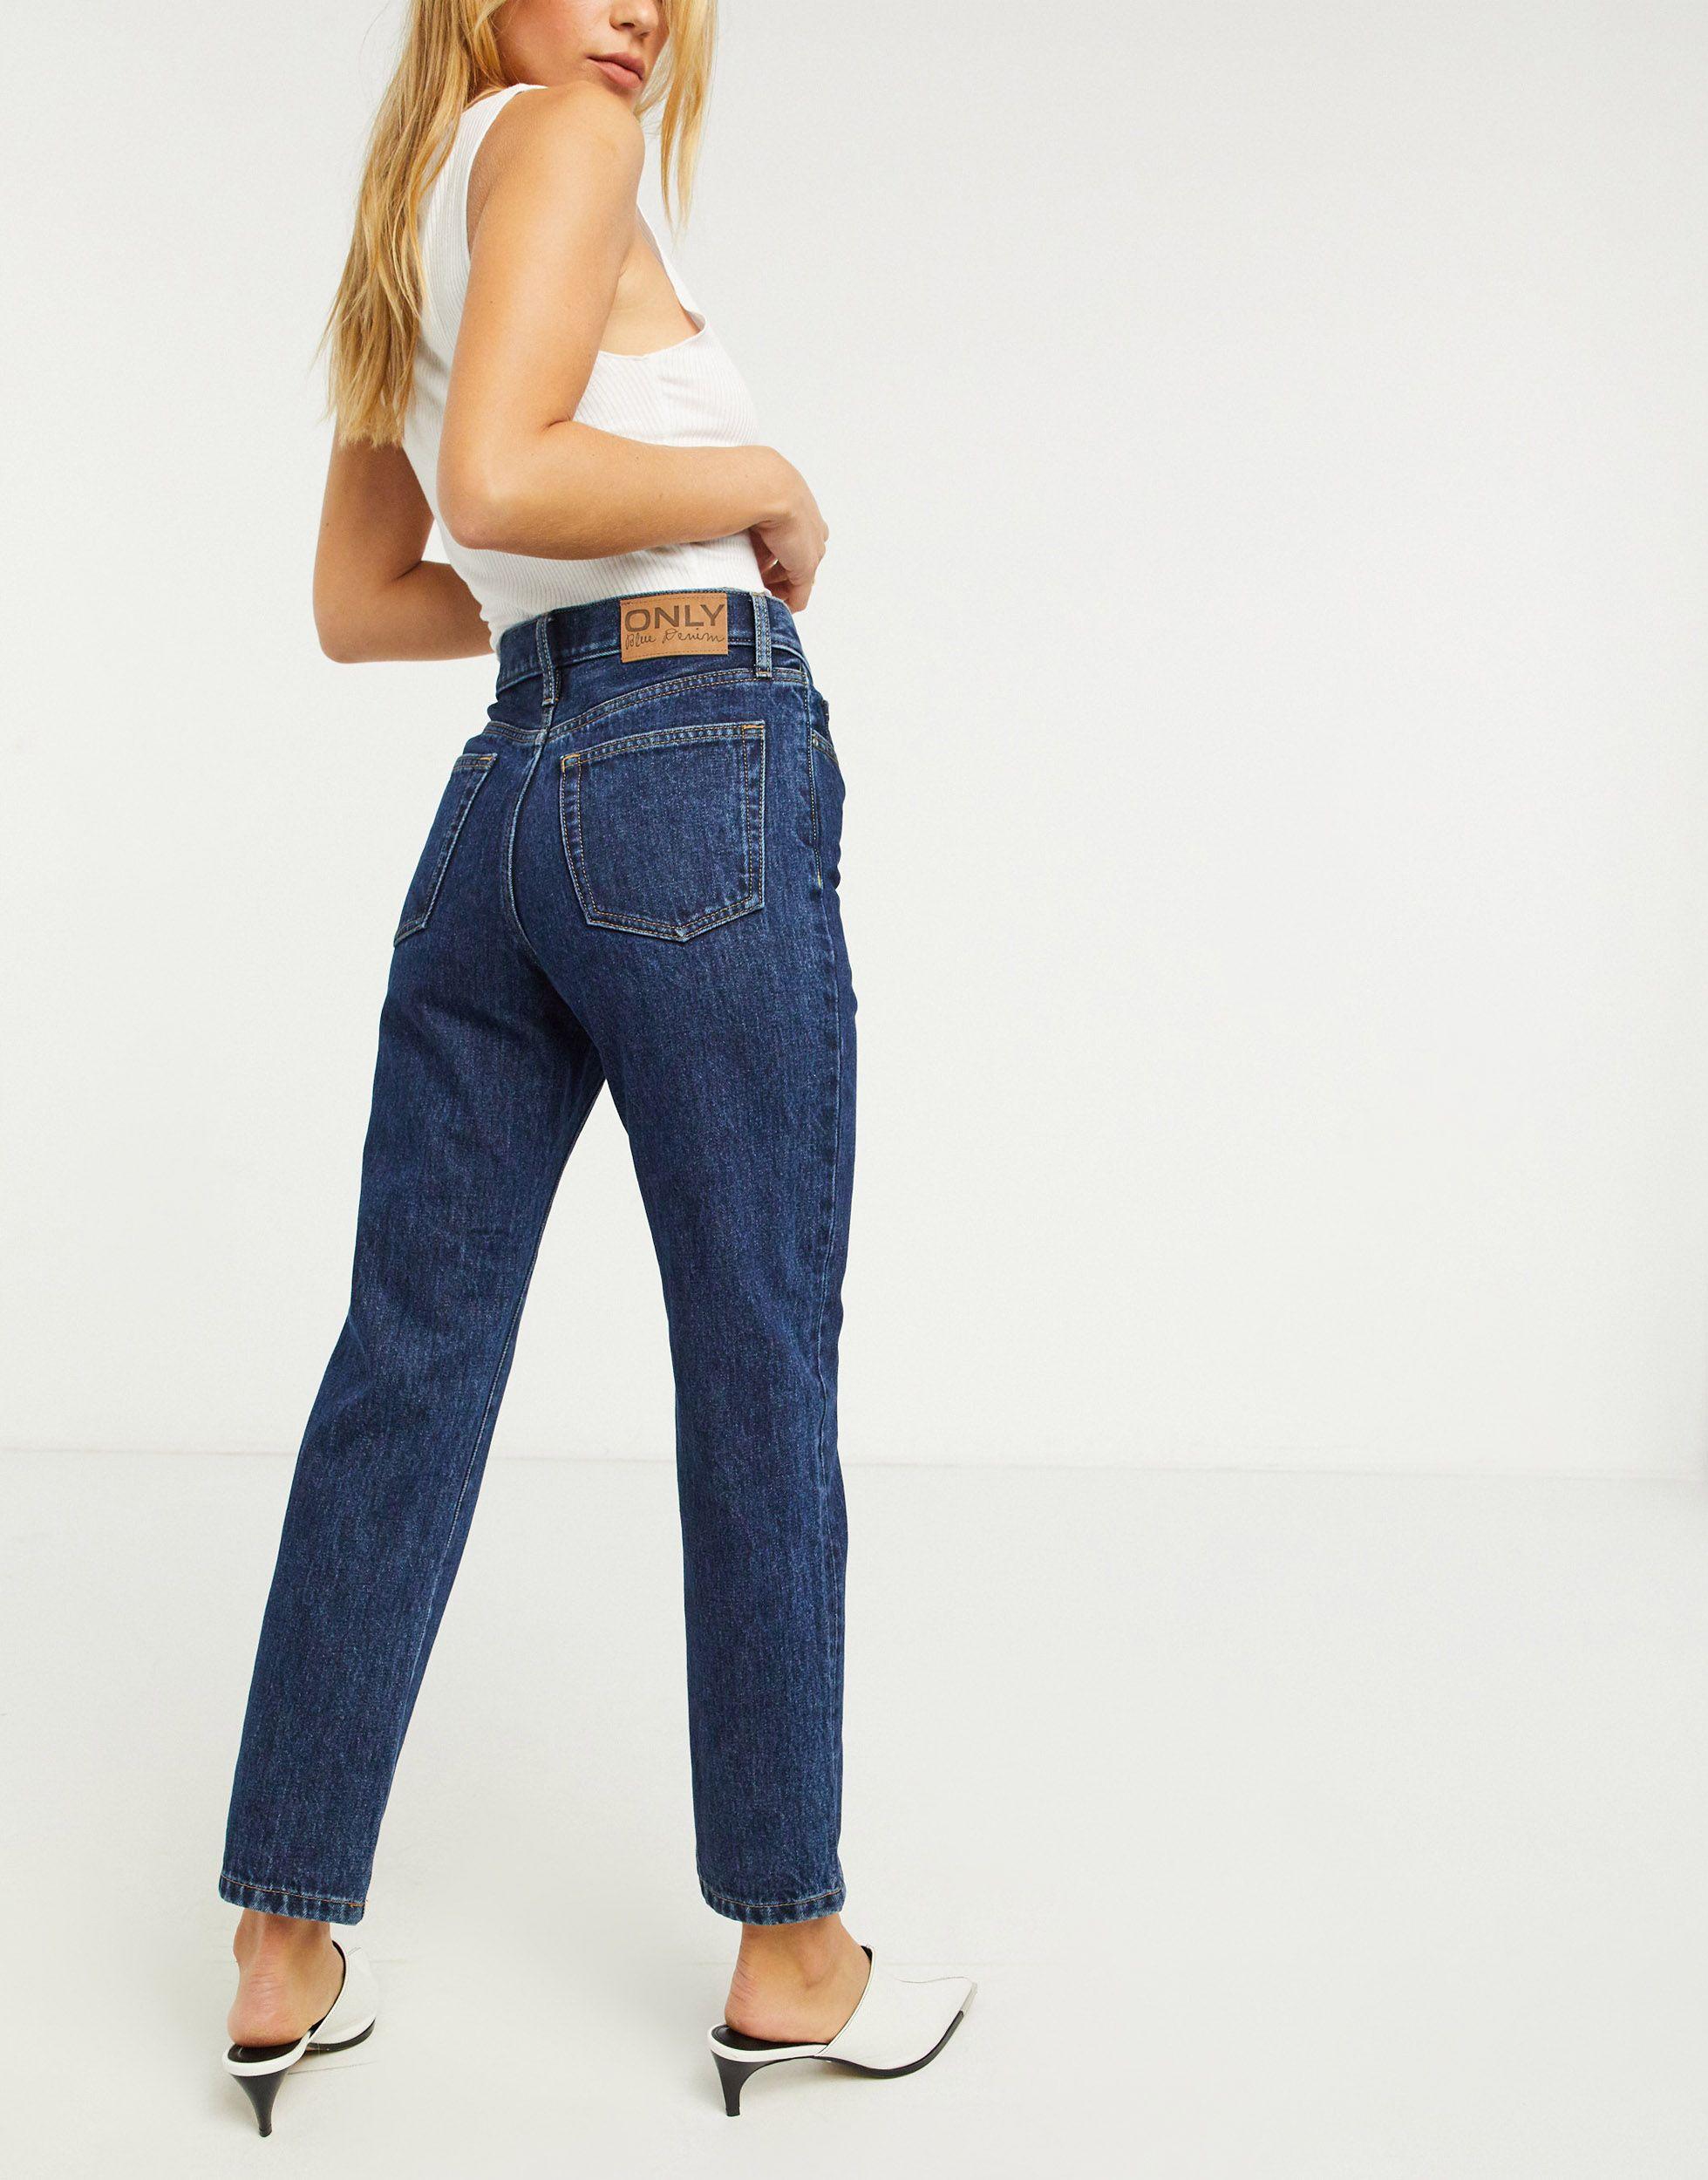 ONLY Denim Fine Straight Leg Jeans With High Waist in Blue | Lyst Canada